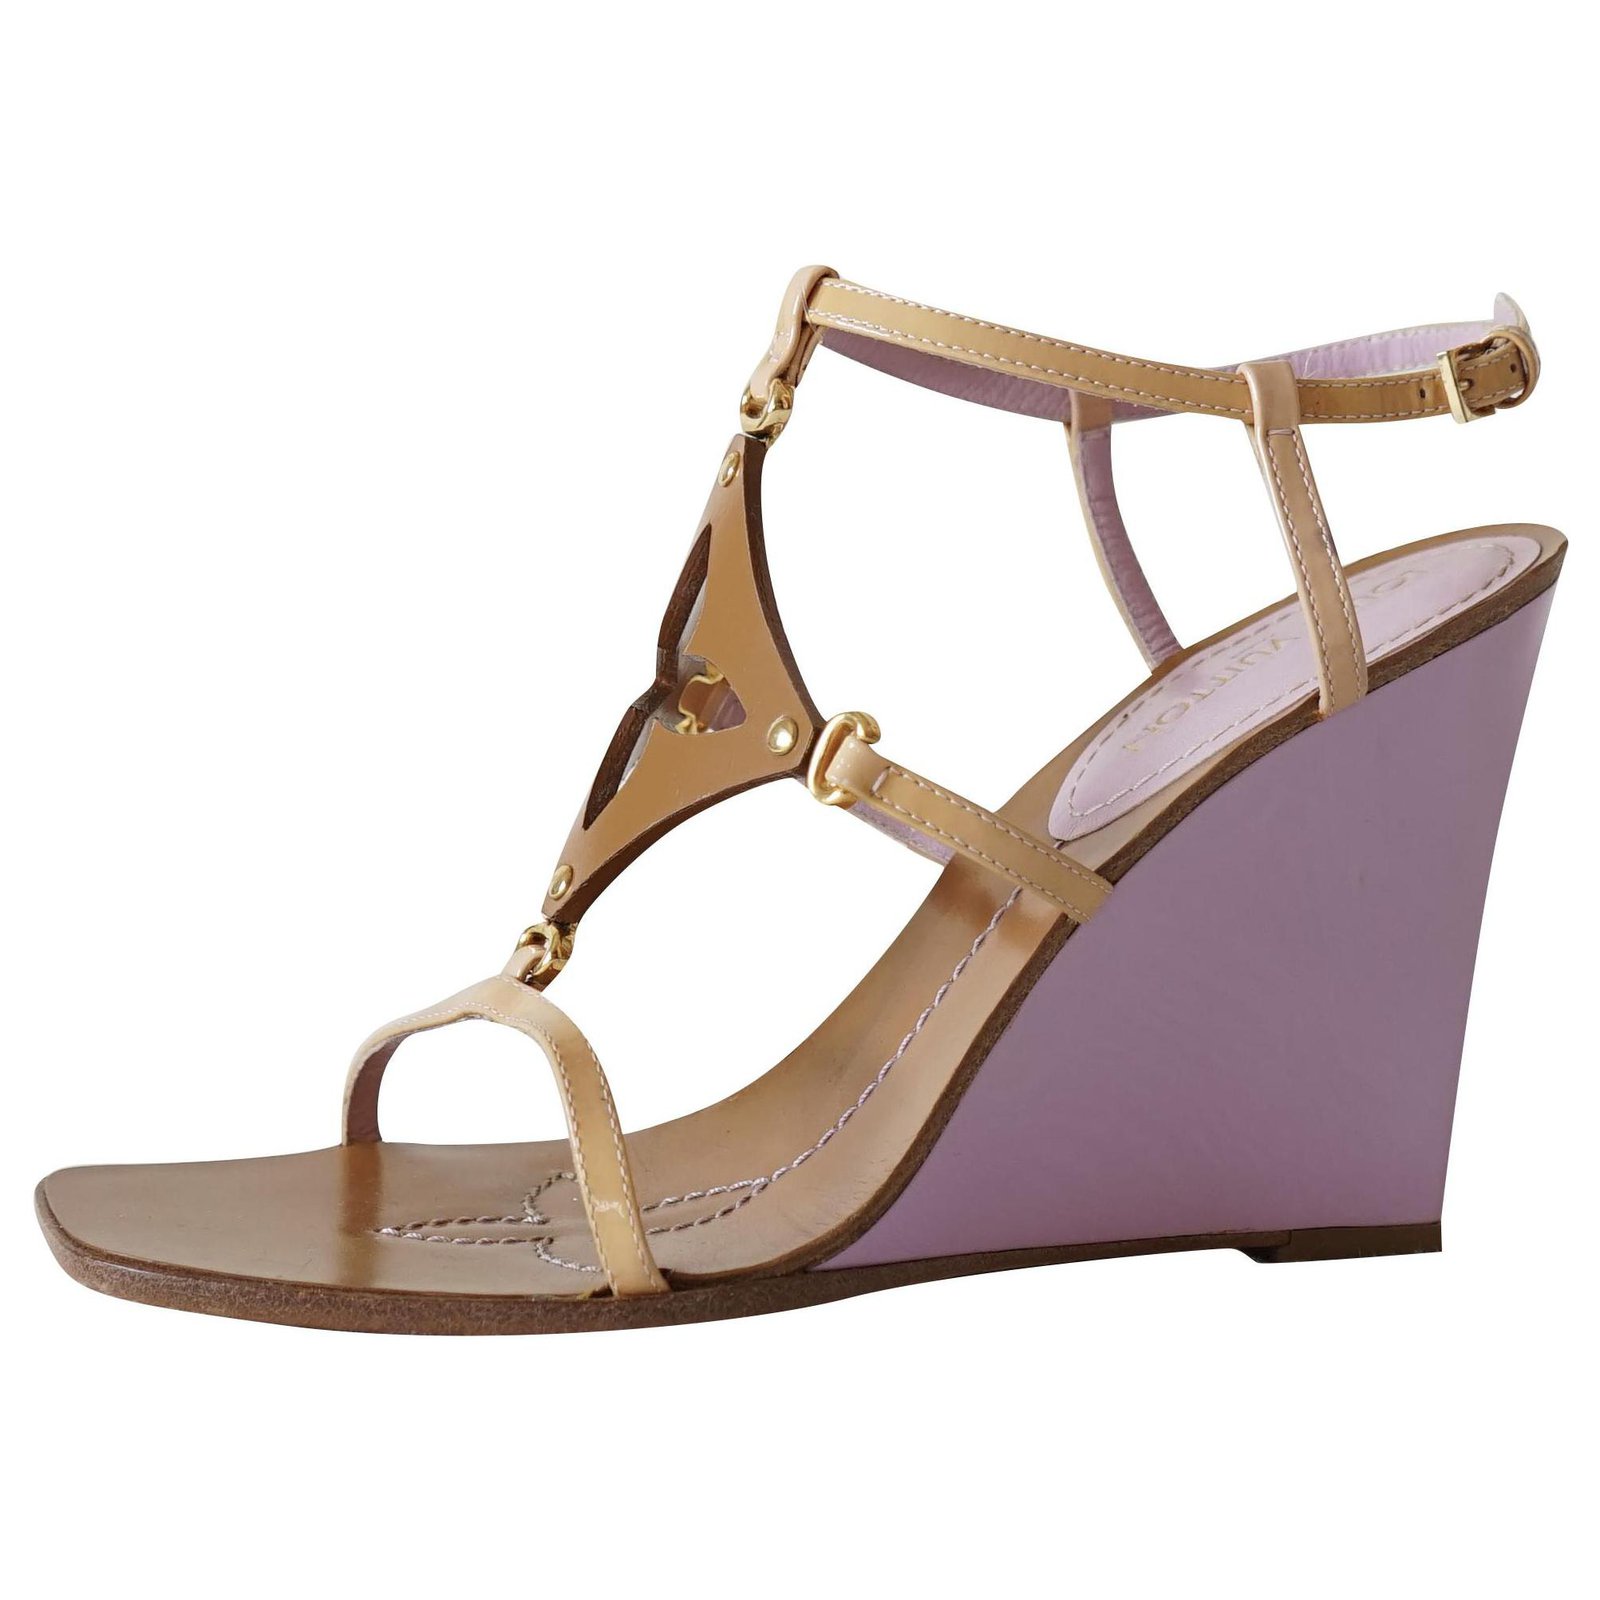 Louis Vuitton Sandals Pink Beige Caramel Leather Patent leather